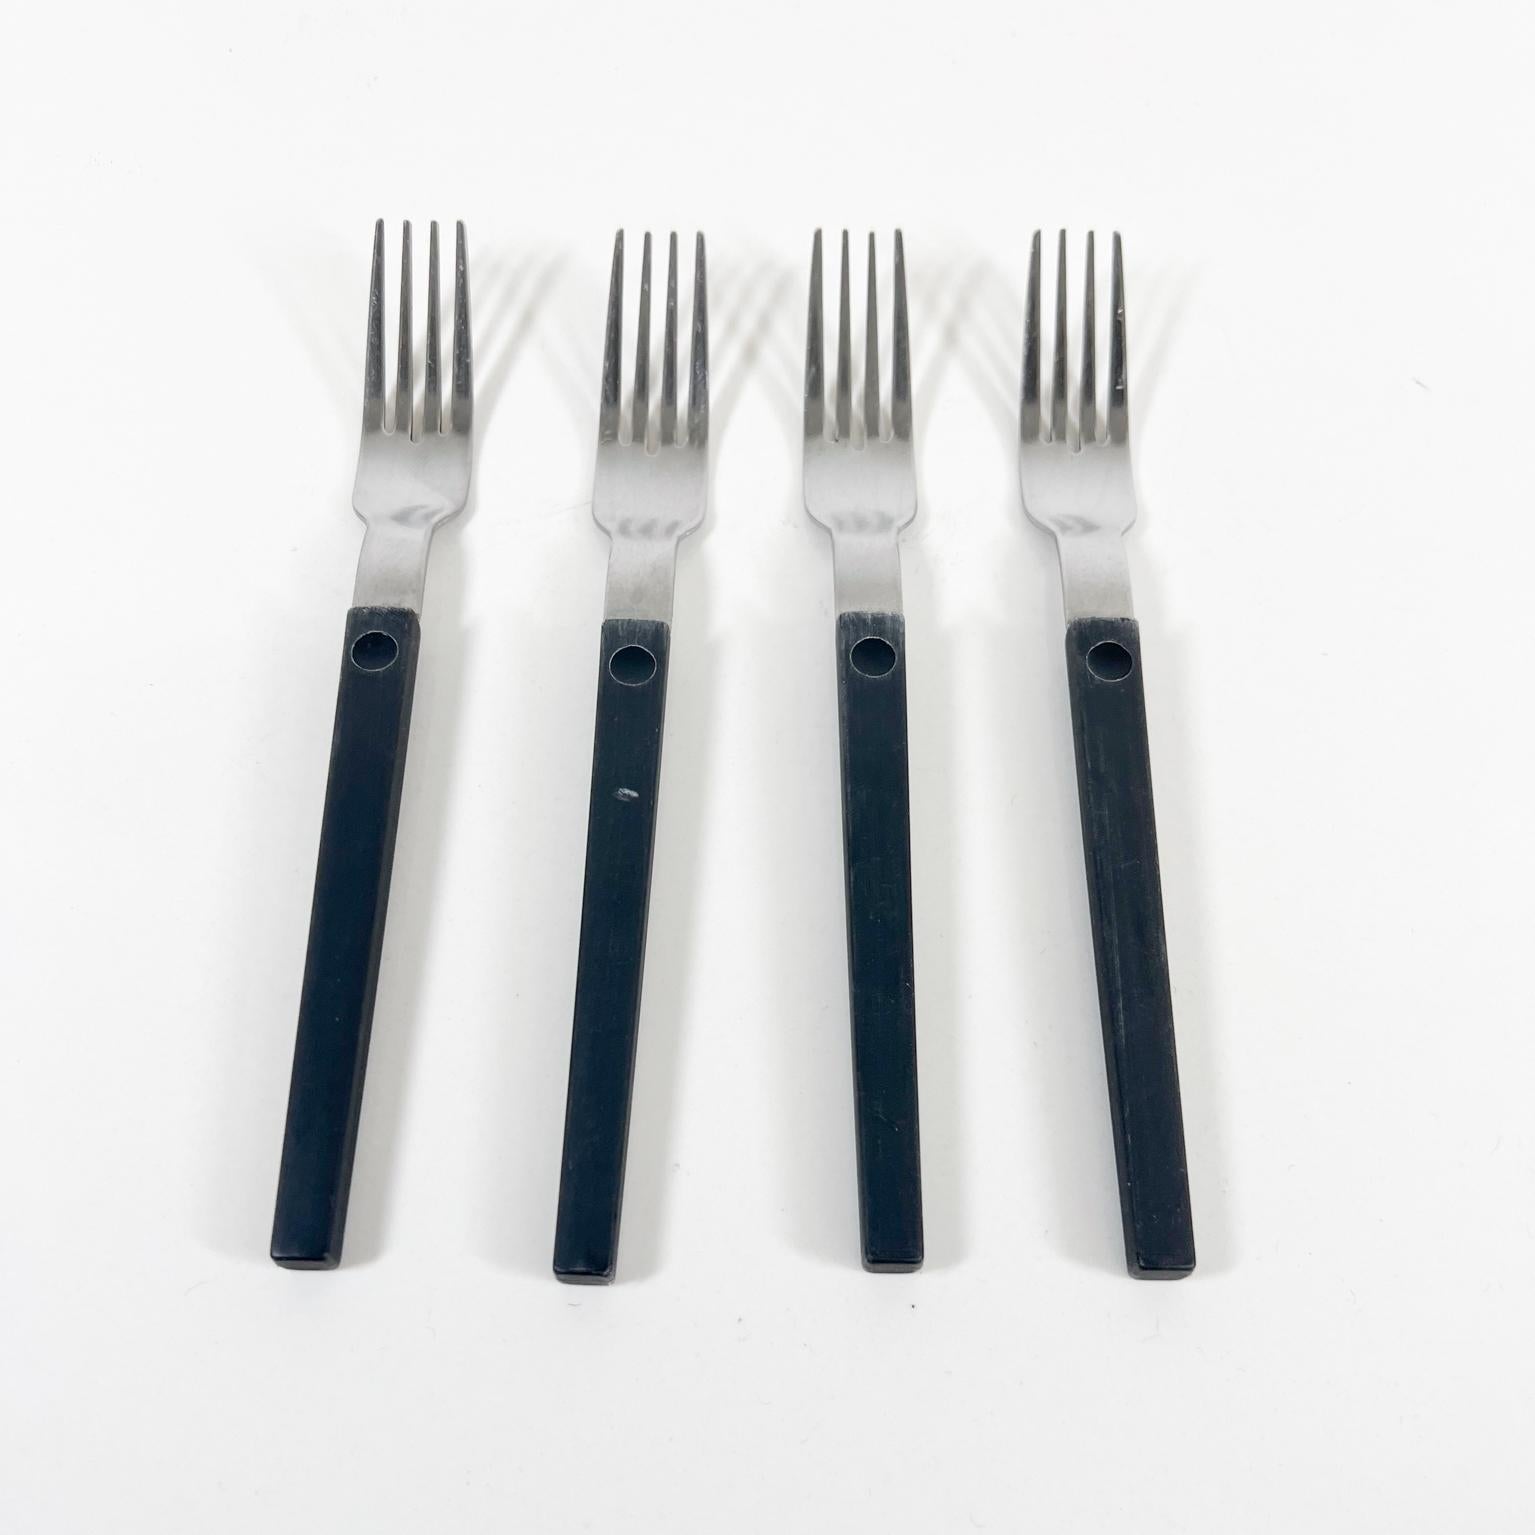 1970s Set of Four Black Forks + One Spoon MCM Flatware
In the Style of Raymond Loewy
Fork .75 x 7.88 x .5 h (4)
Spoon 1.5 x 7.5 x .5 h (1)
Unrestored preowned vintage condition
See all images.